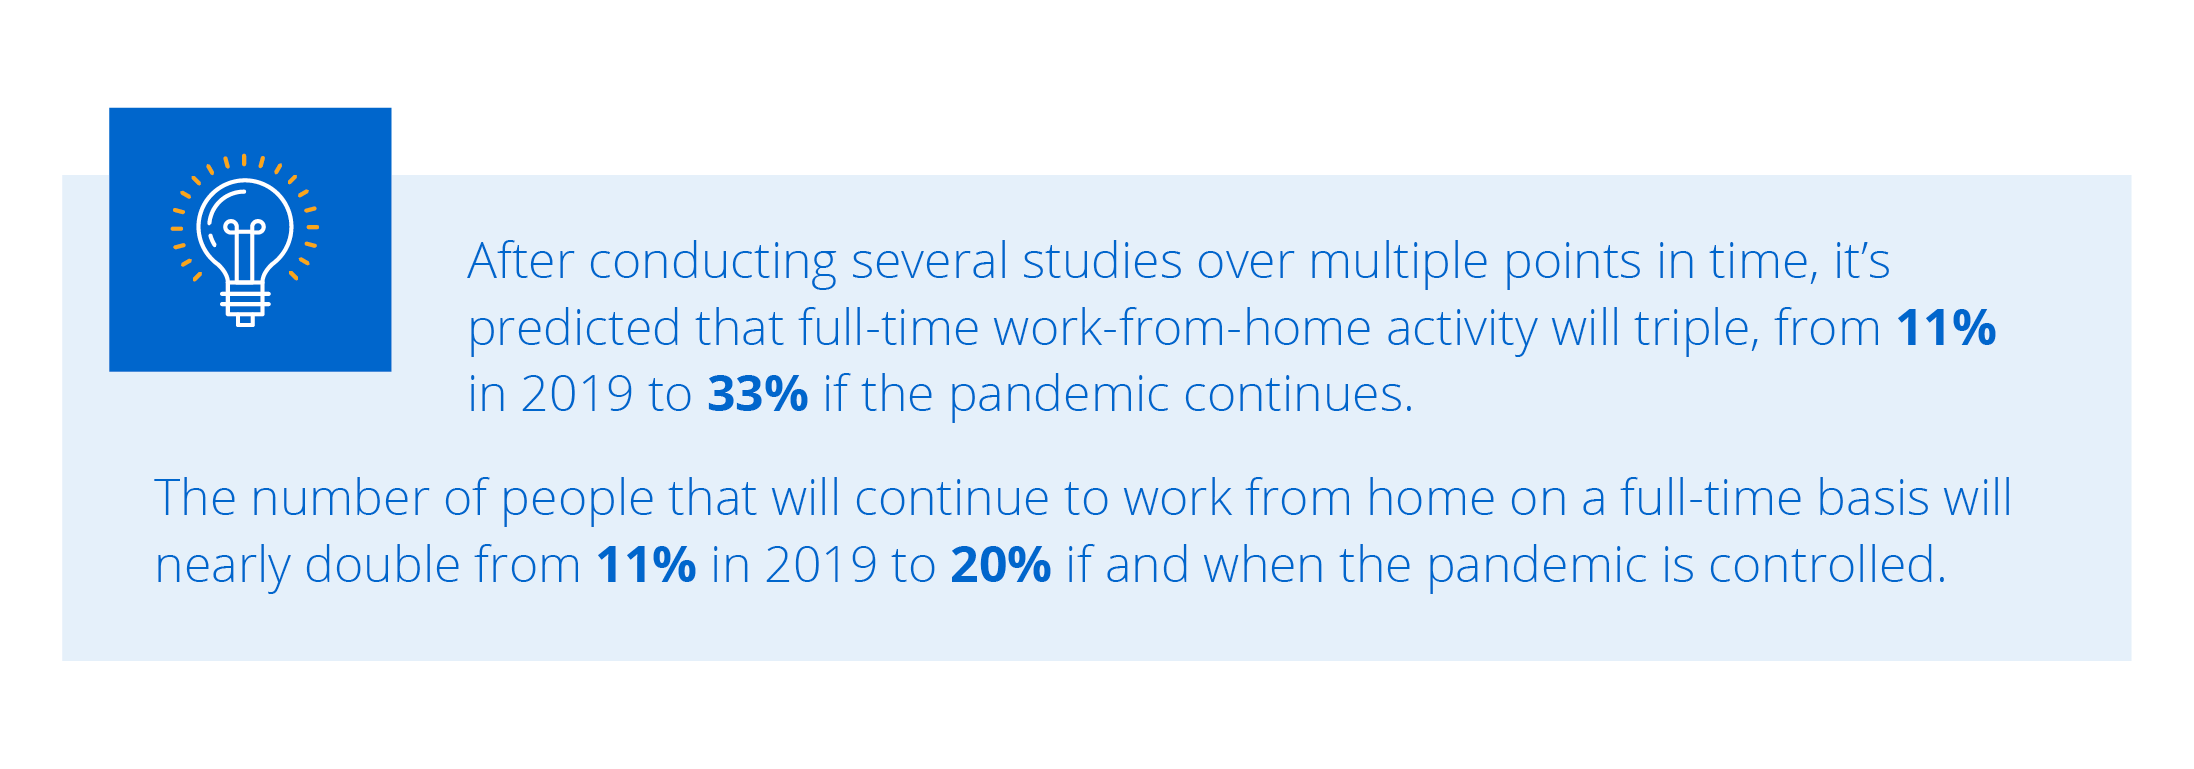 predictions that full-time work from home will triple if pandemic continues and will double if pandemic is controlled